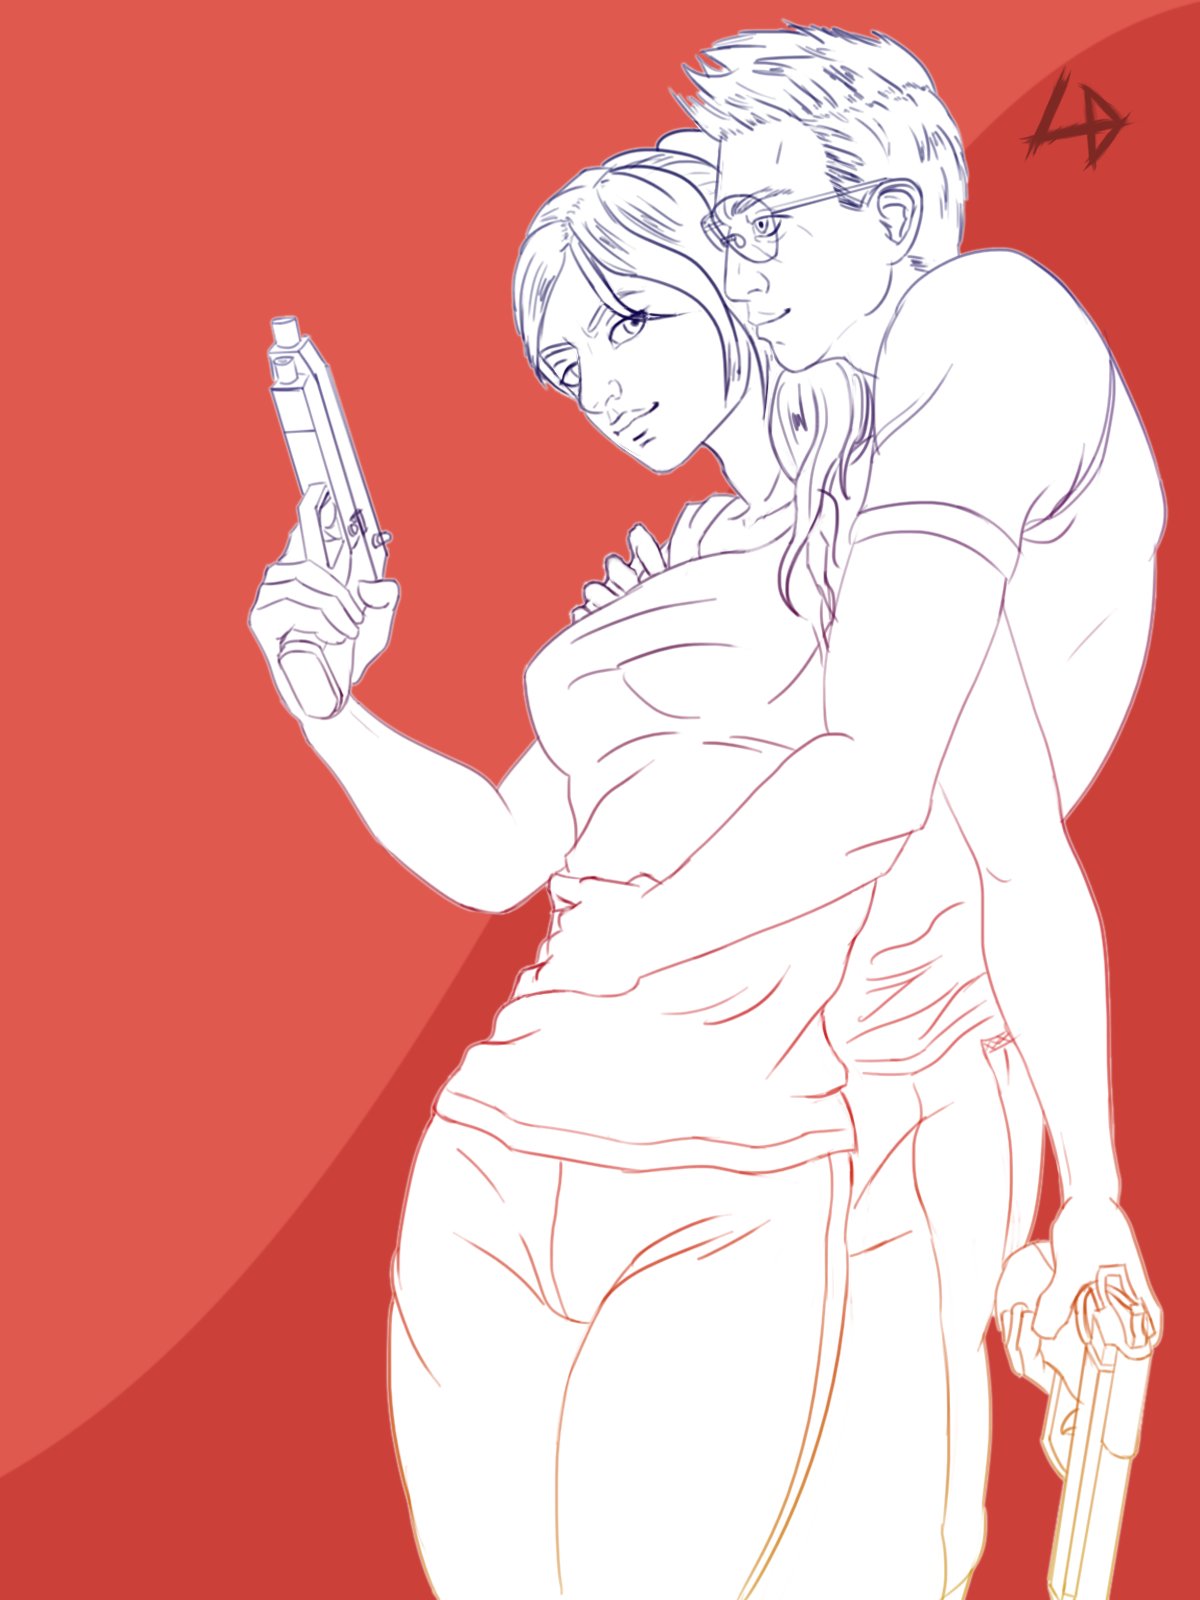 Download Anime Couple Coloring Page  Coloring Sheet Anime Couple  Full  Size PNG Image  PNGkit